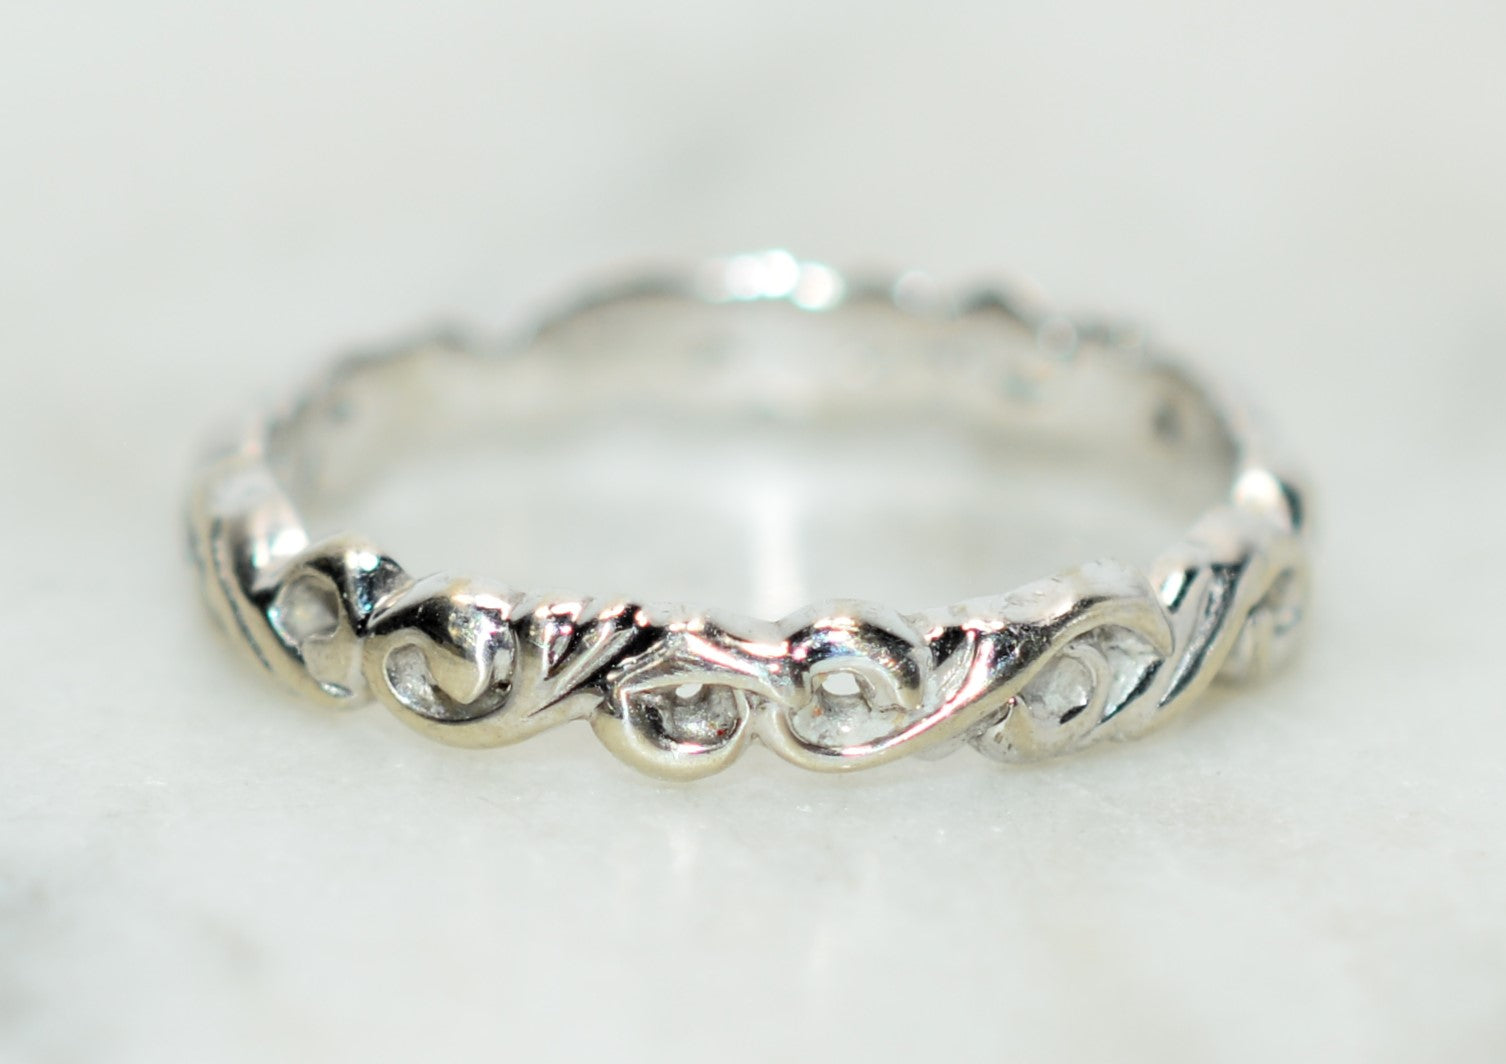 Solid White Gold Ring 14K White Gold Band No Stone Ladies Ring Stackable Ring Scroll Ring Vintage Estate Jewellery Fine Jewelry Filigree